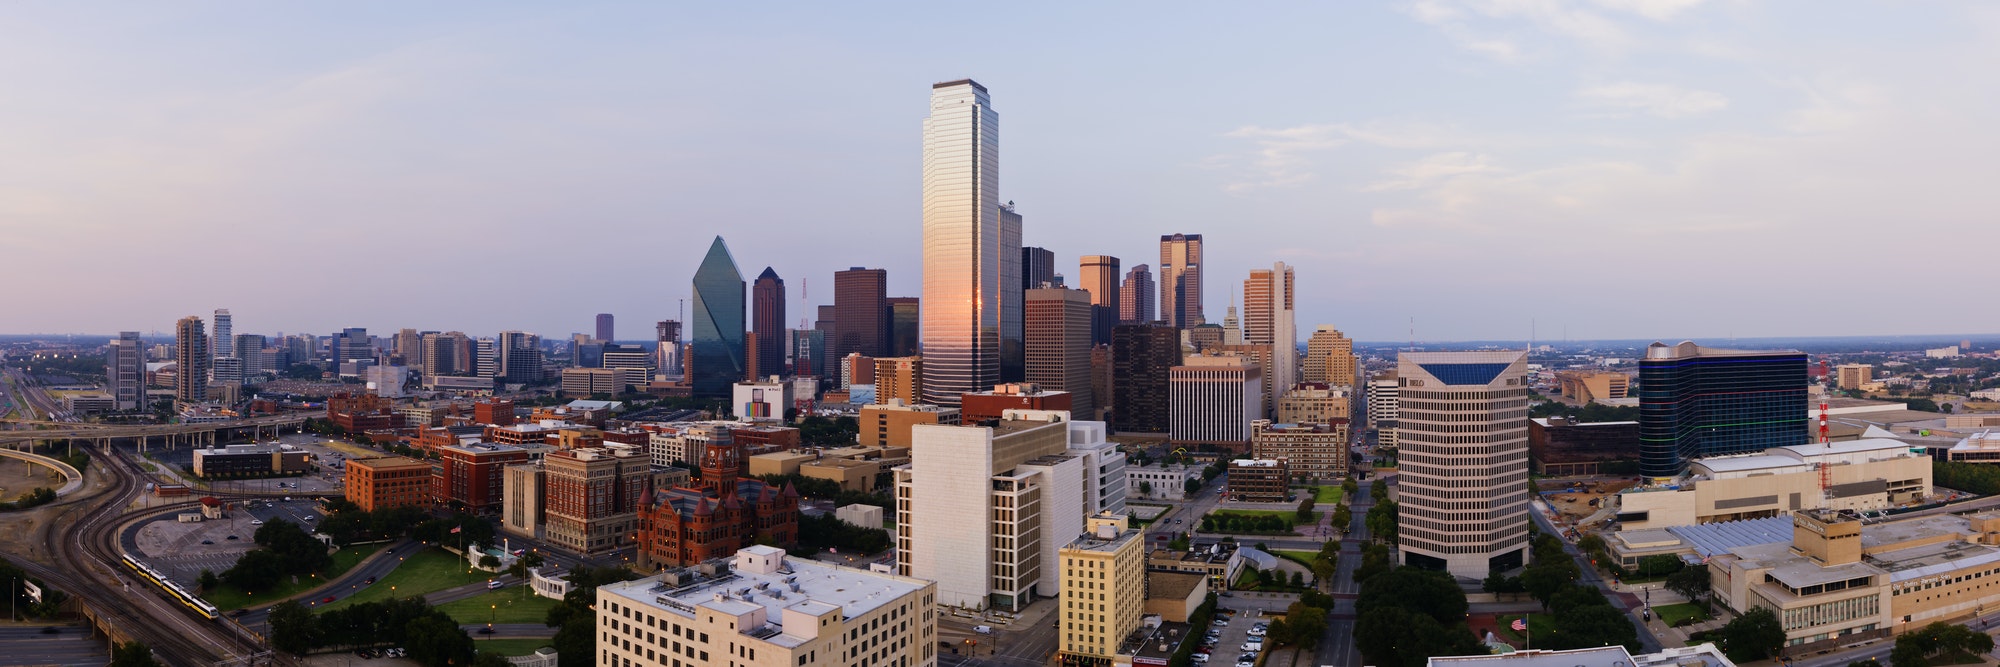 Downtown Dallas at Sunset